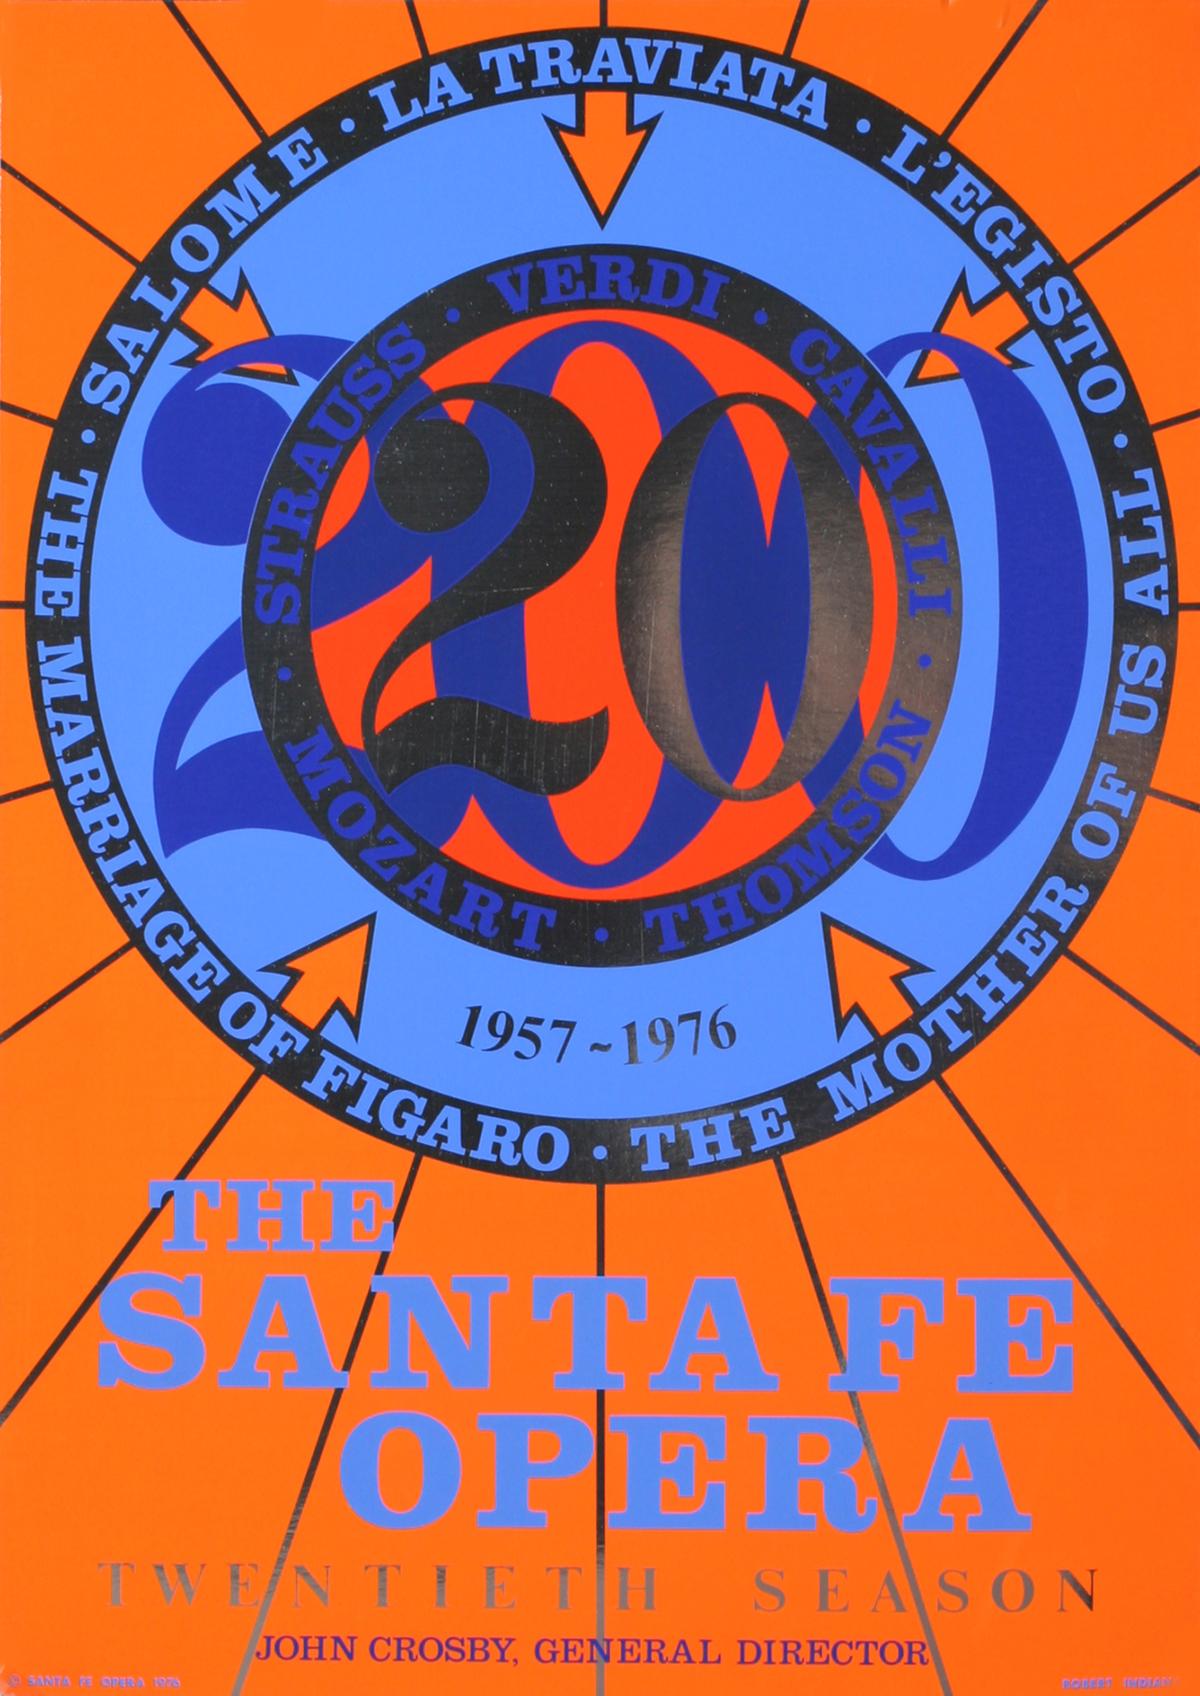 Sku: MG1106
Artist: Robert Indiana
Title: The Santa Fe Opera
Year: 1976
Signed: No
Medium: Serigraph
Paper Size: 31 x 22 inches ( 78.74 x 55.88 cm )
Image Size: 31 x 22 inches ( 78.74 x 55.88 cm )
Edition Size: 3000
Framed: No
Condition: A-: Near